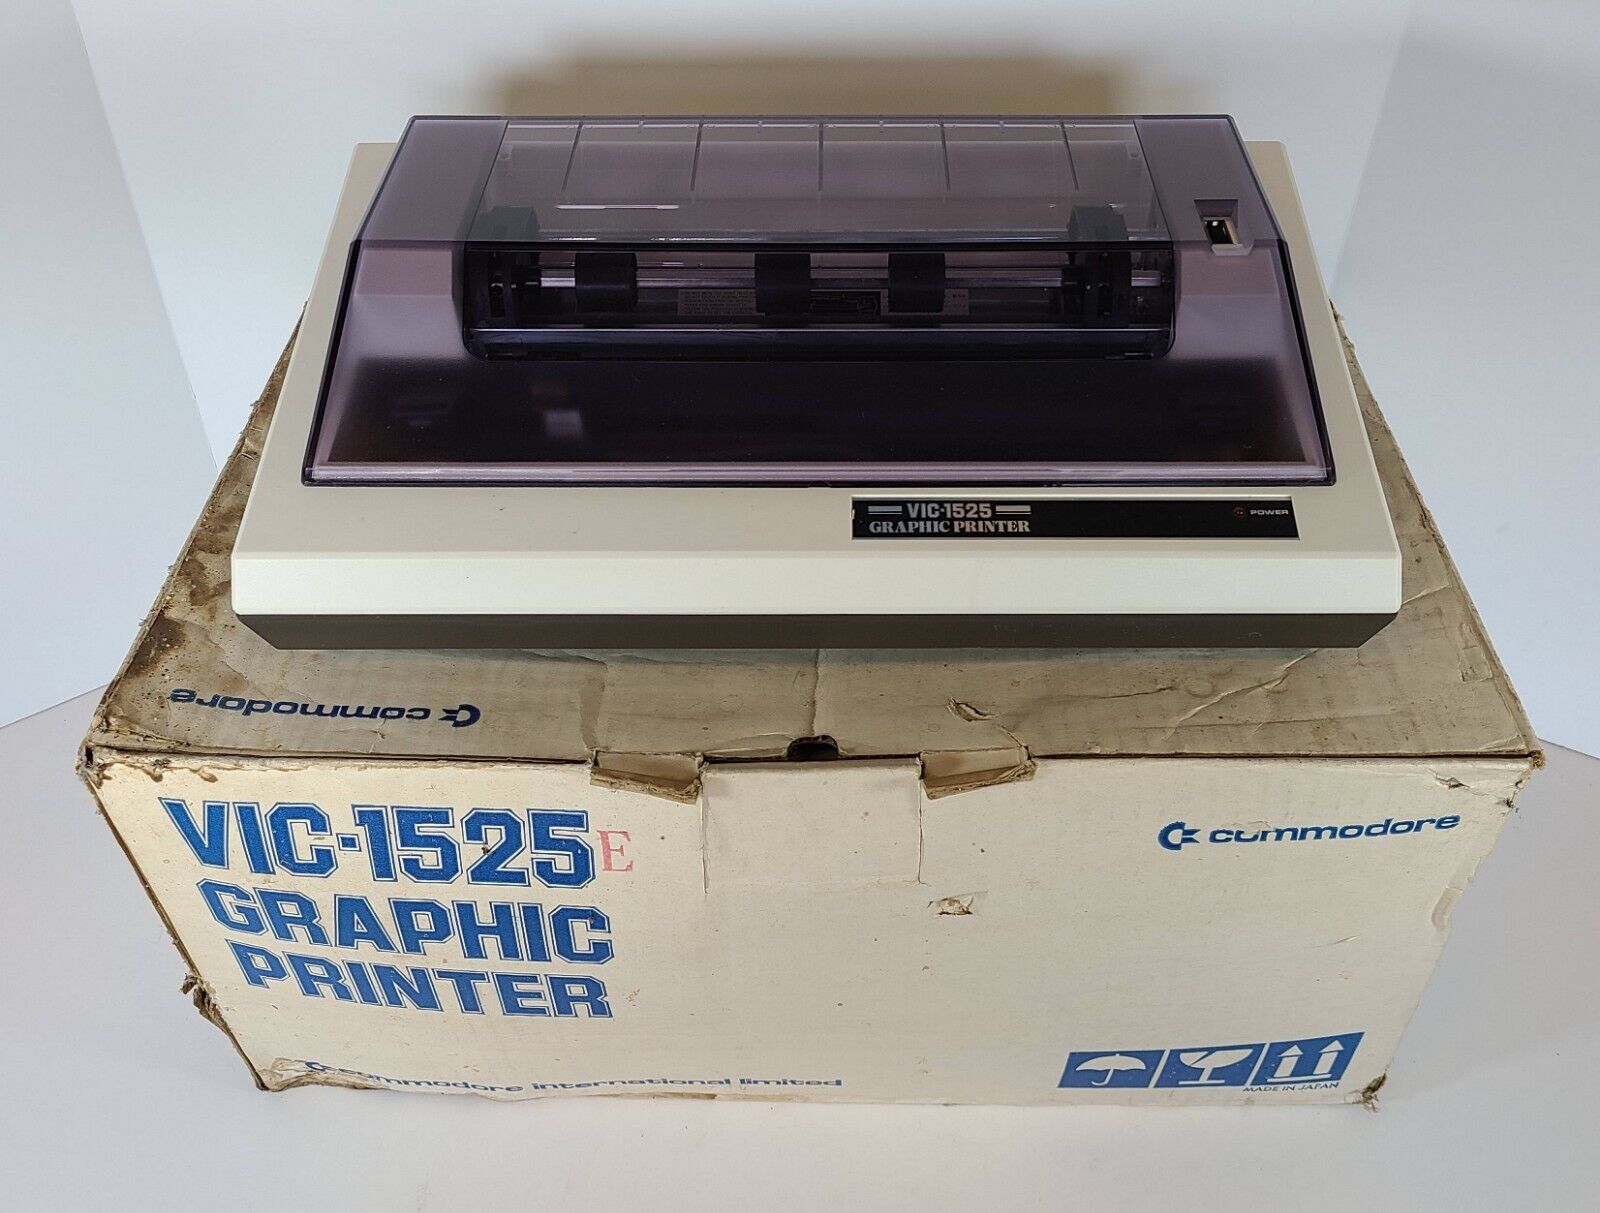 Commodore VIC-1525 Graphic Printer W/Original Box Powers On ISSUES READ